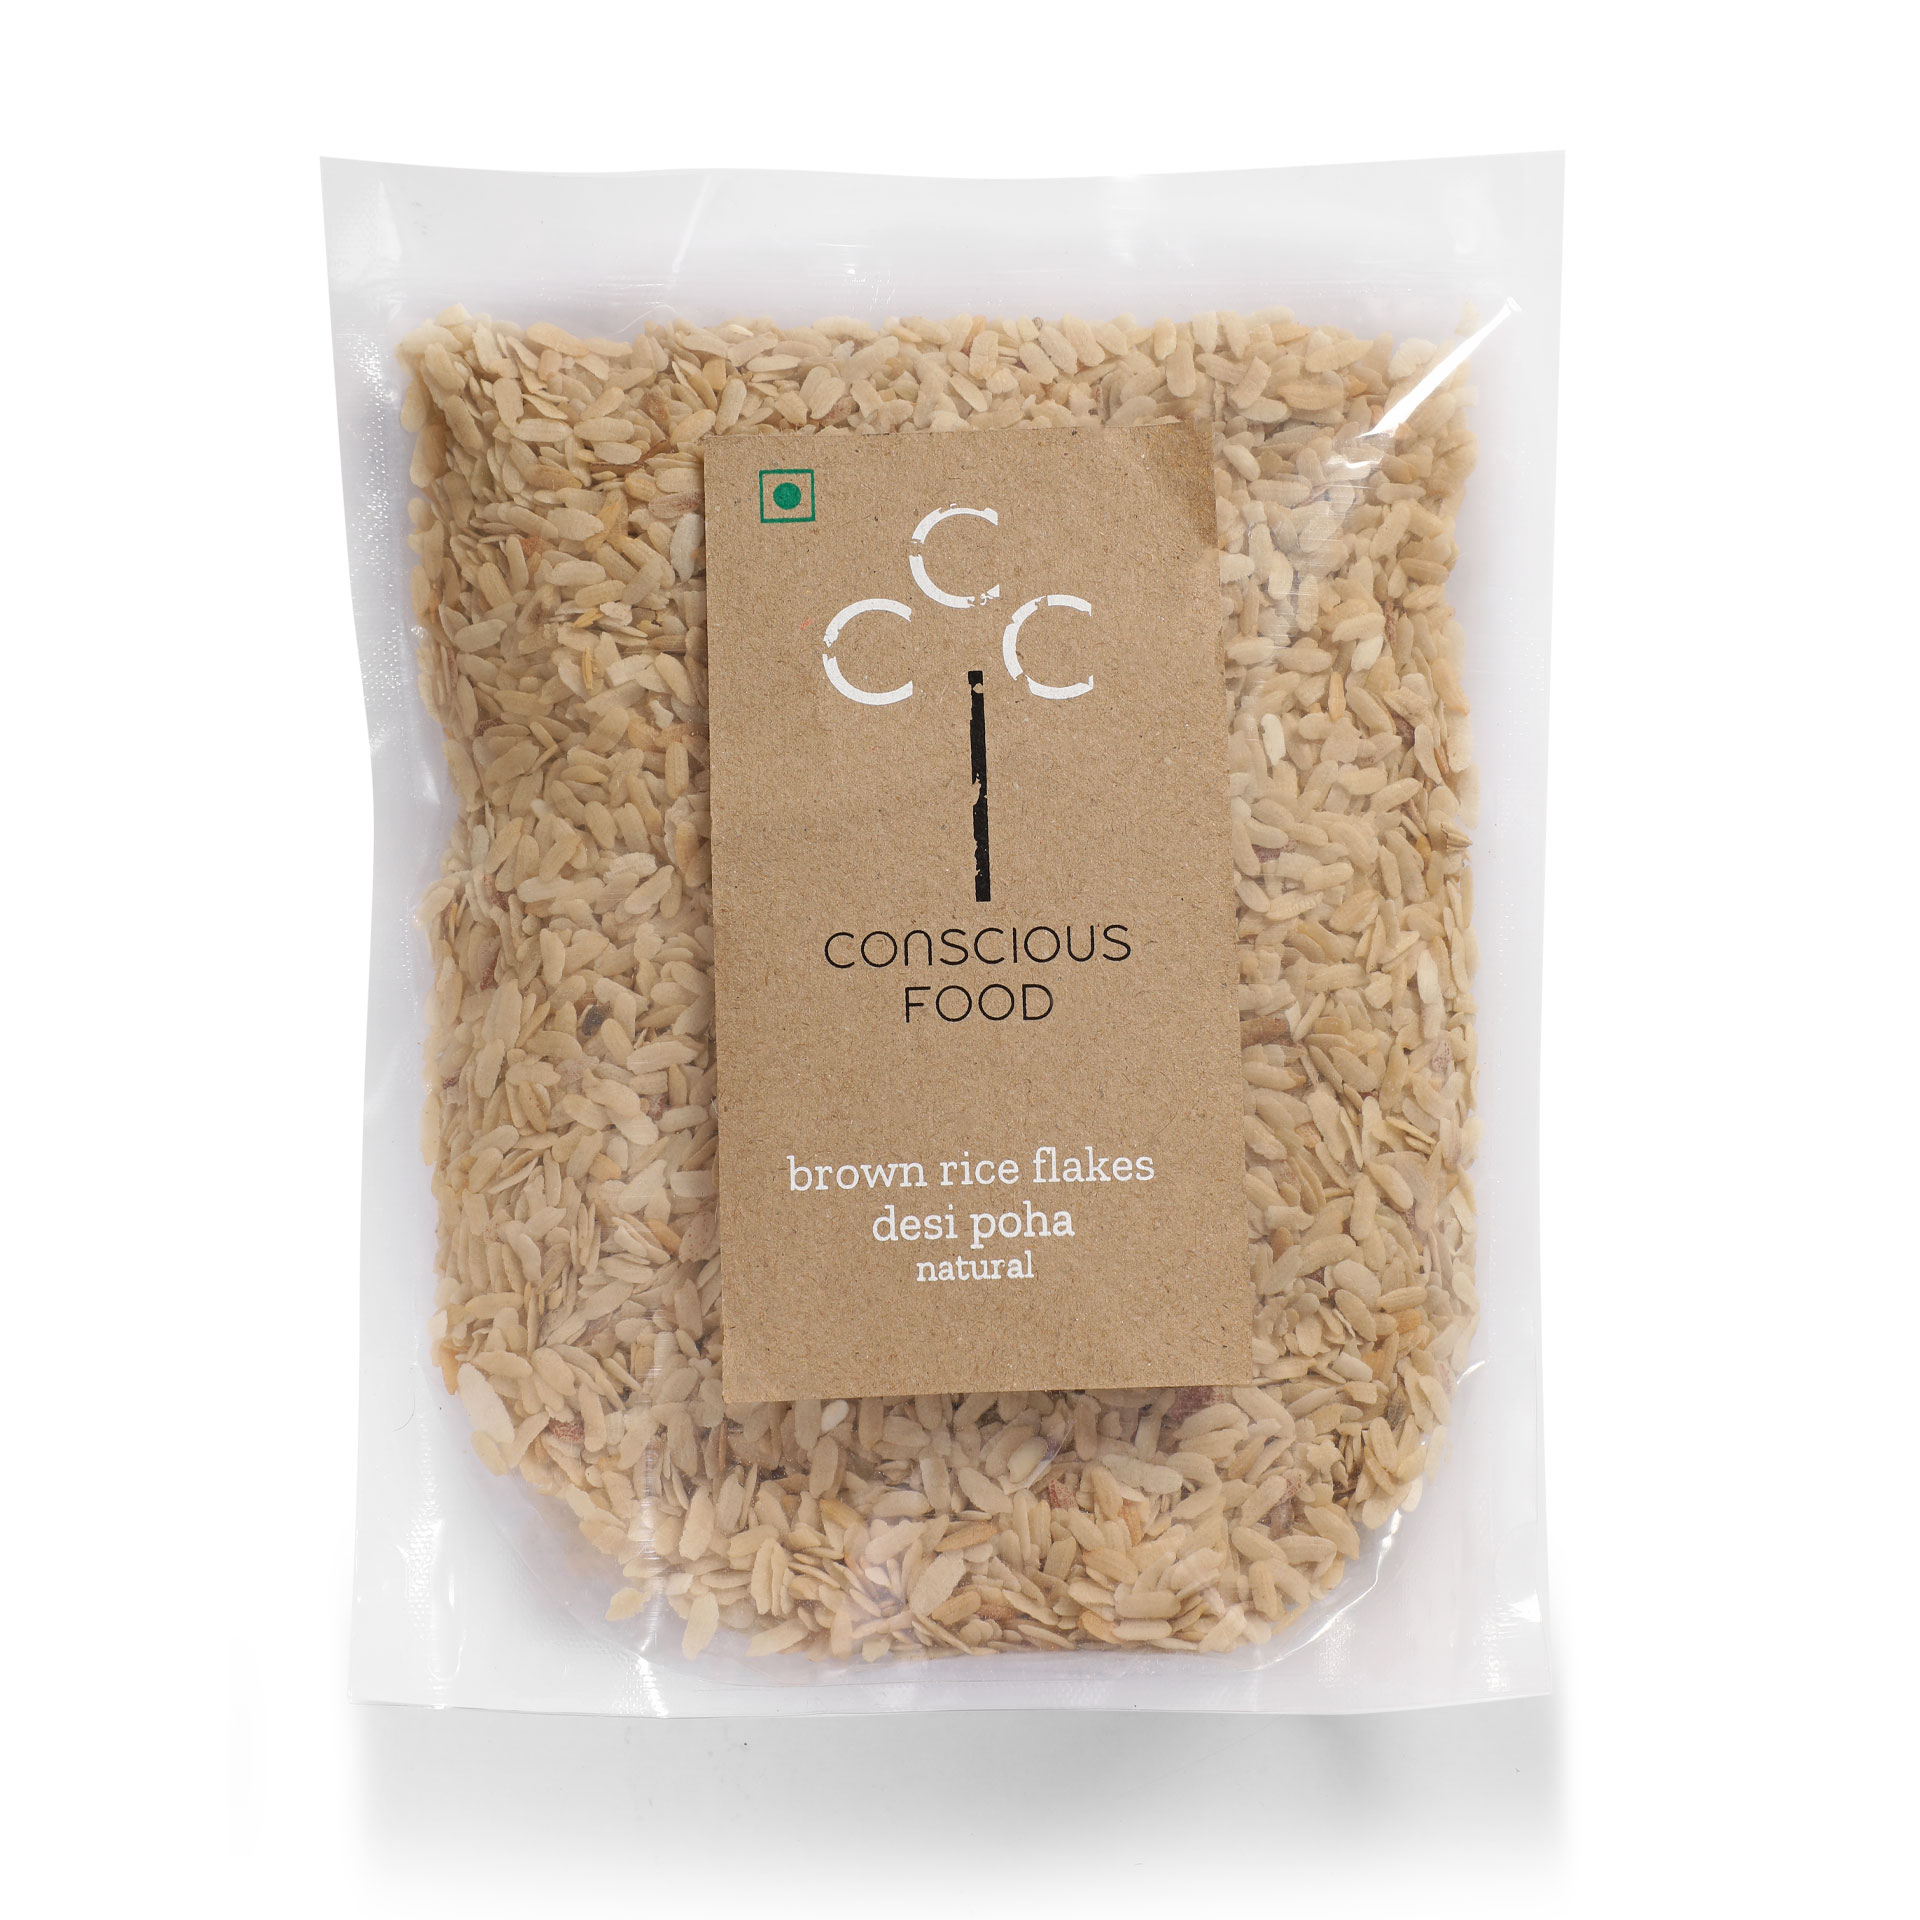 Product: Conscious Food Brown Rice Flakes 500g